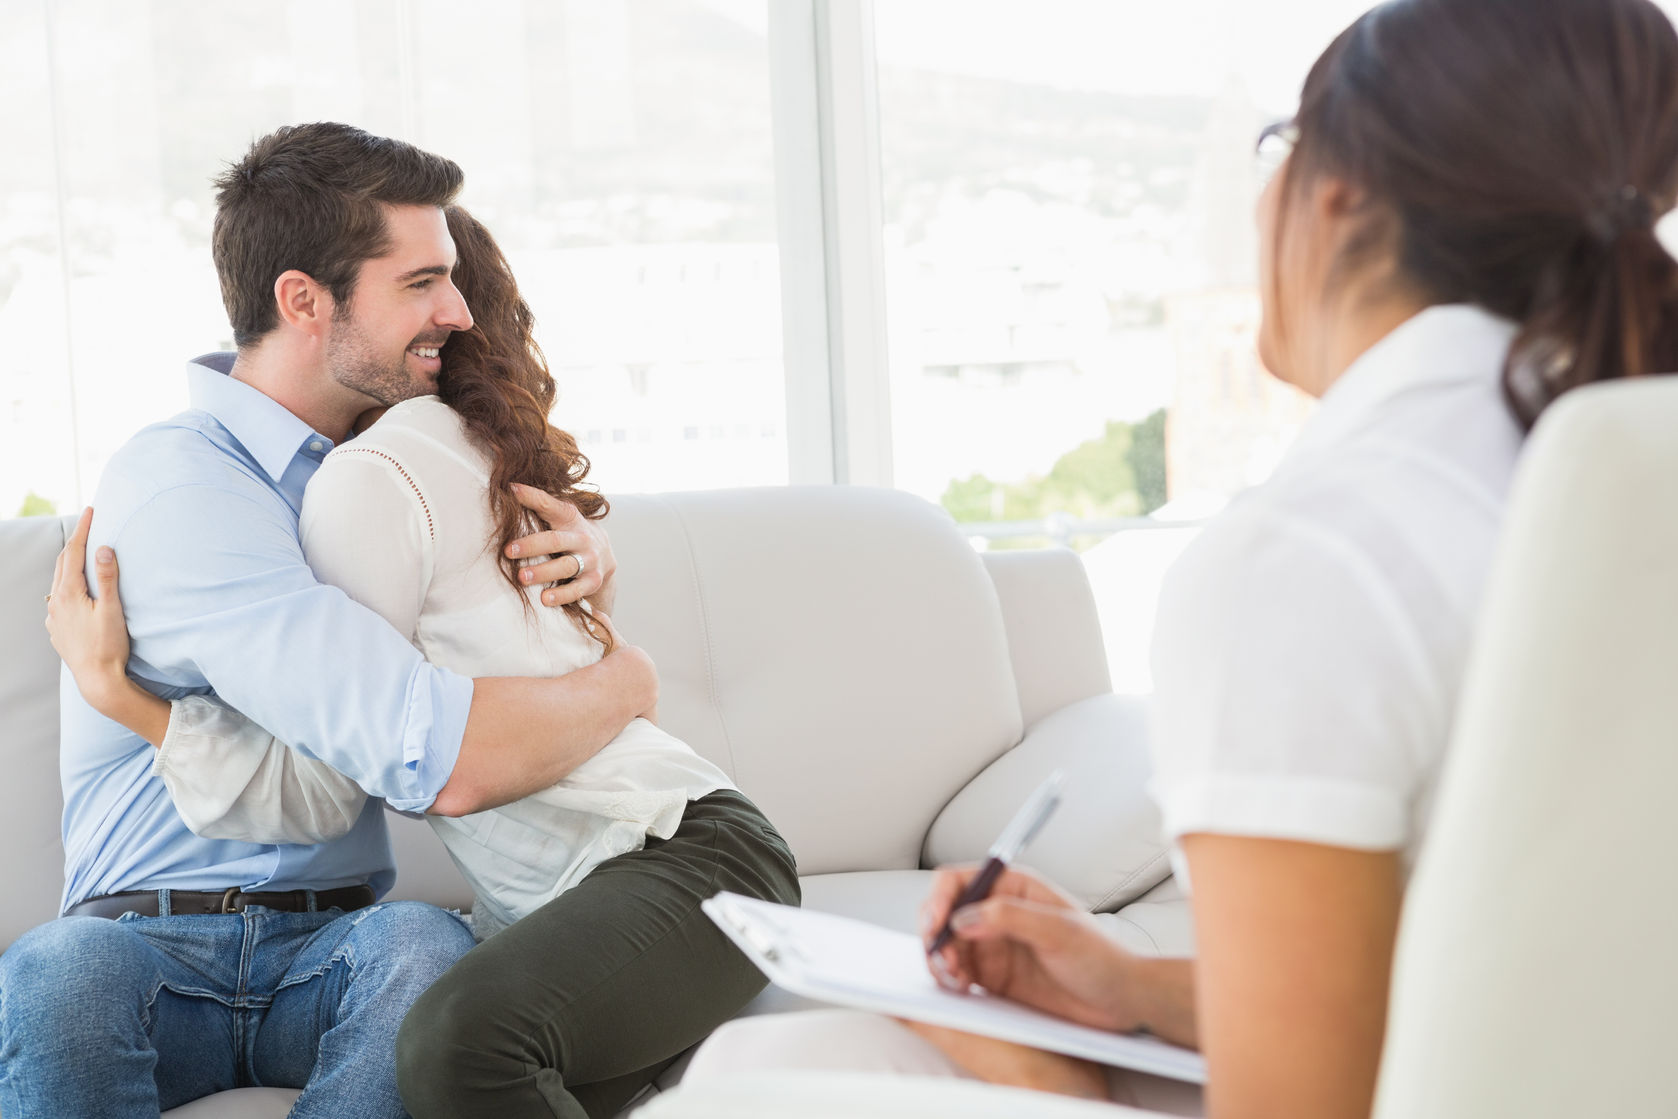 counselling spirituality hard times, successful marriage